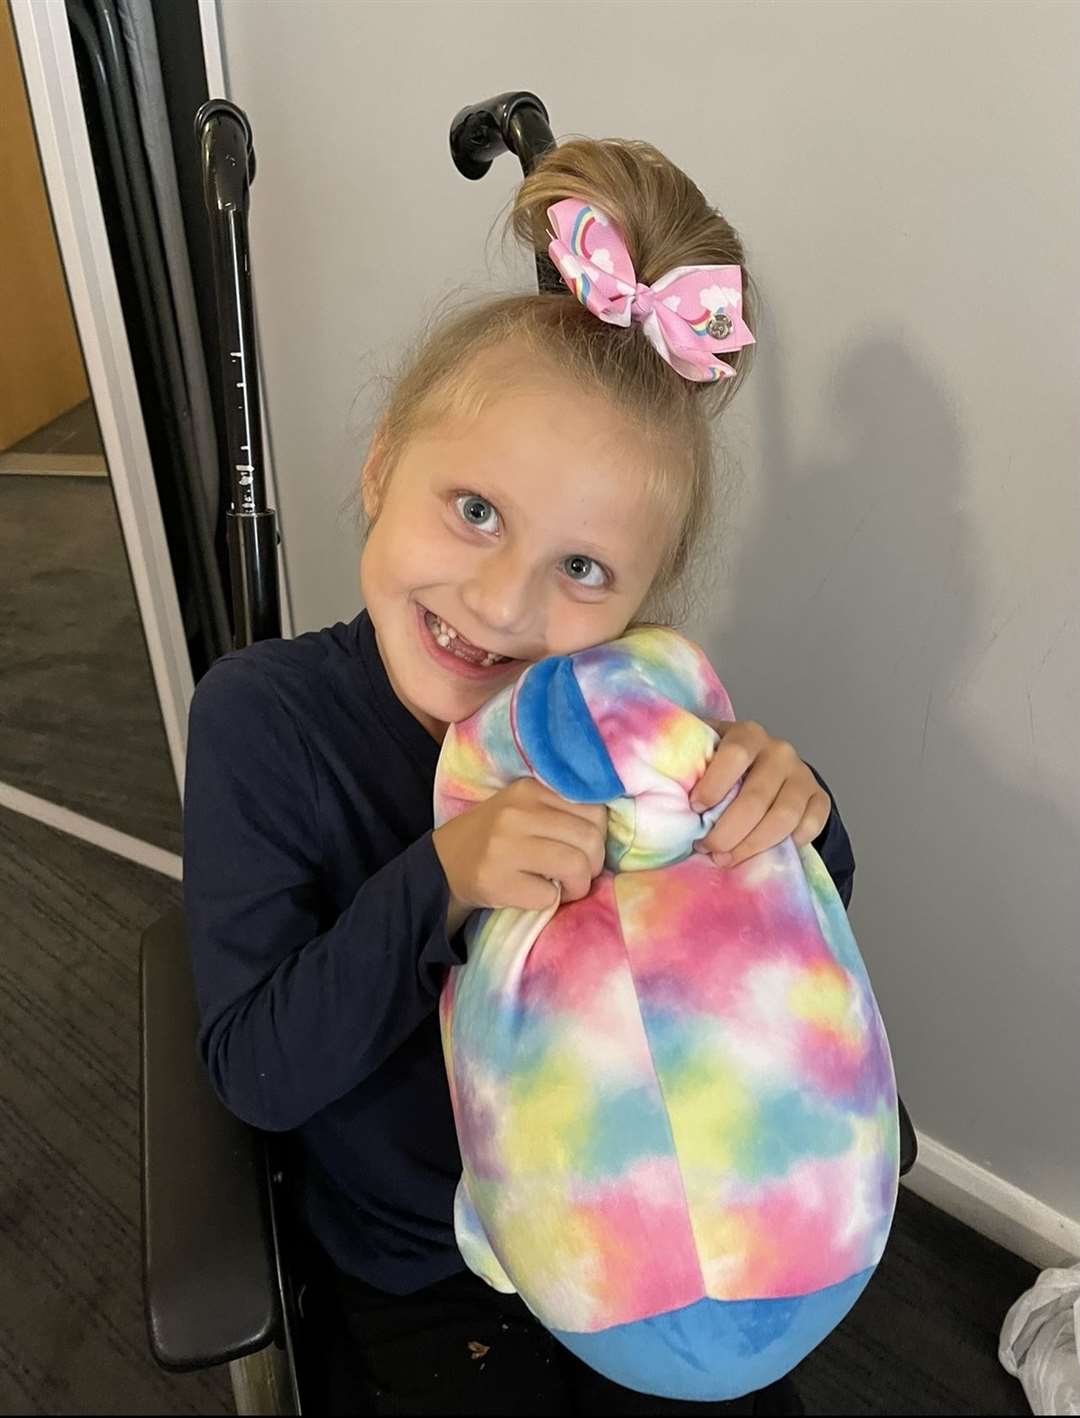 Margate seven-year-old Lottie is unable to walk